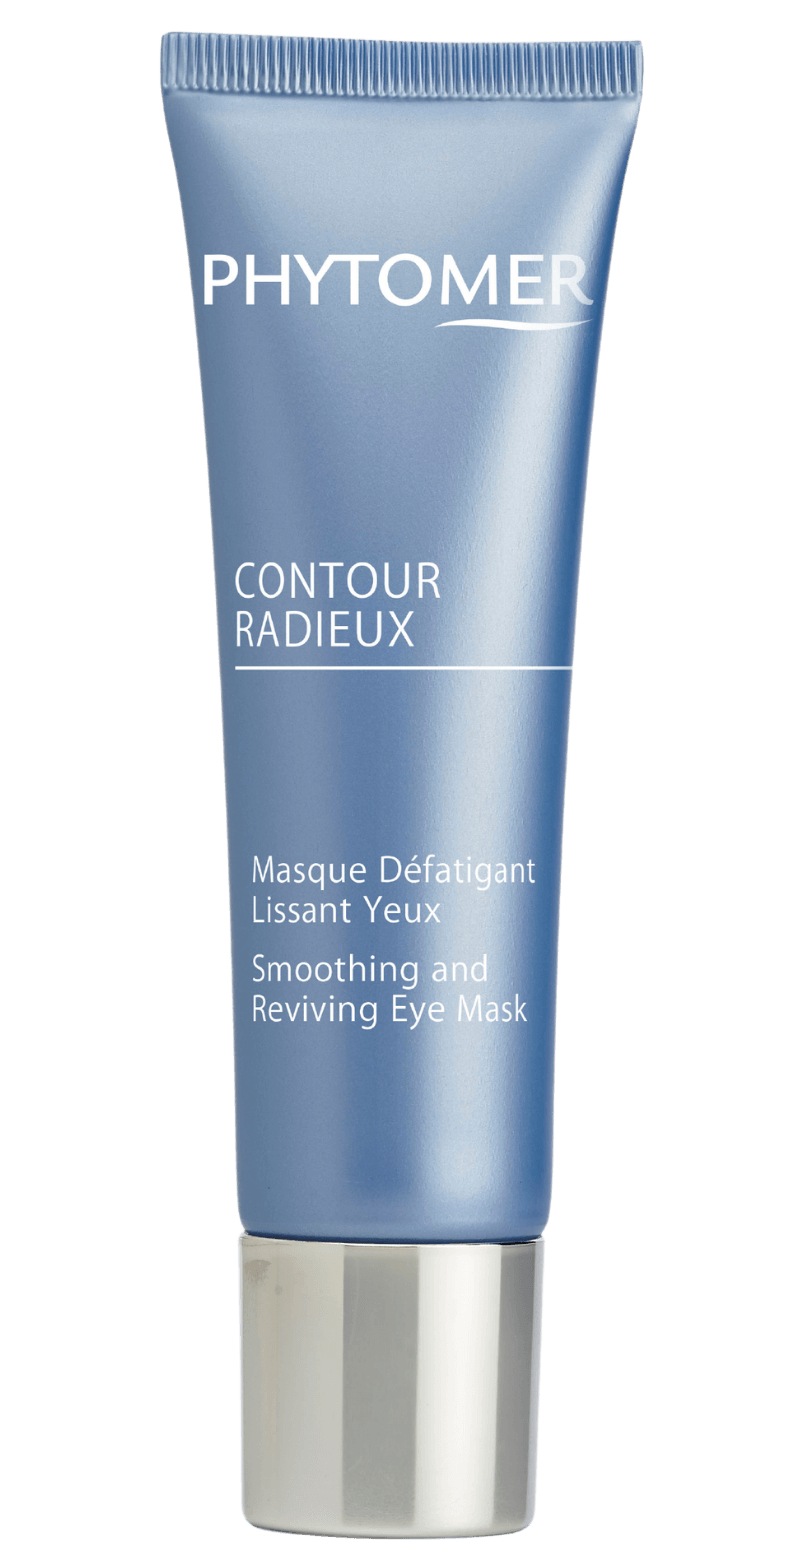 's Phytomer CONTOUR RADIEUX Smoothing and Reviving Eye Mask - Bellini's Skin and Parfumerie 